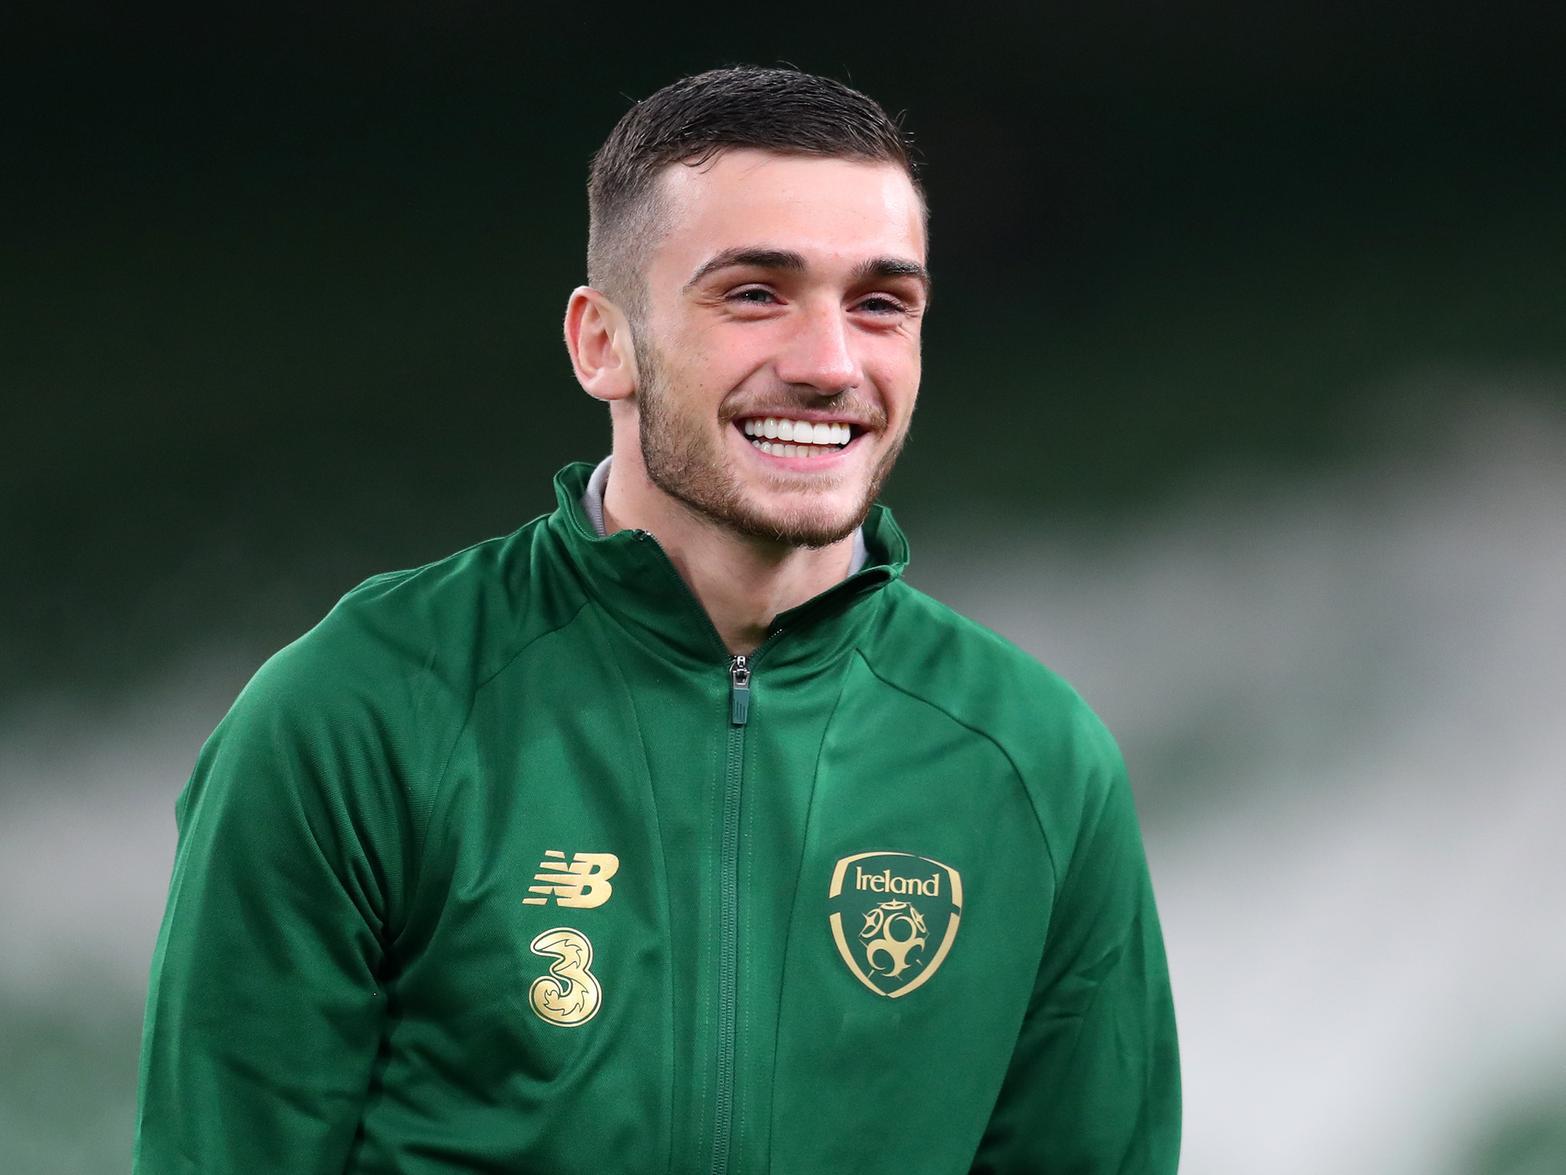 QPR look set to up their efforts to secure Spurs starlet Troy Parrott on loan, after Nahki Wells was recalled from his temporary spell with the Hoops by Burnley. (Sky Sports)